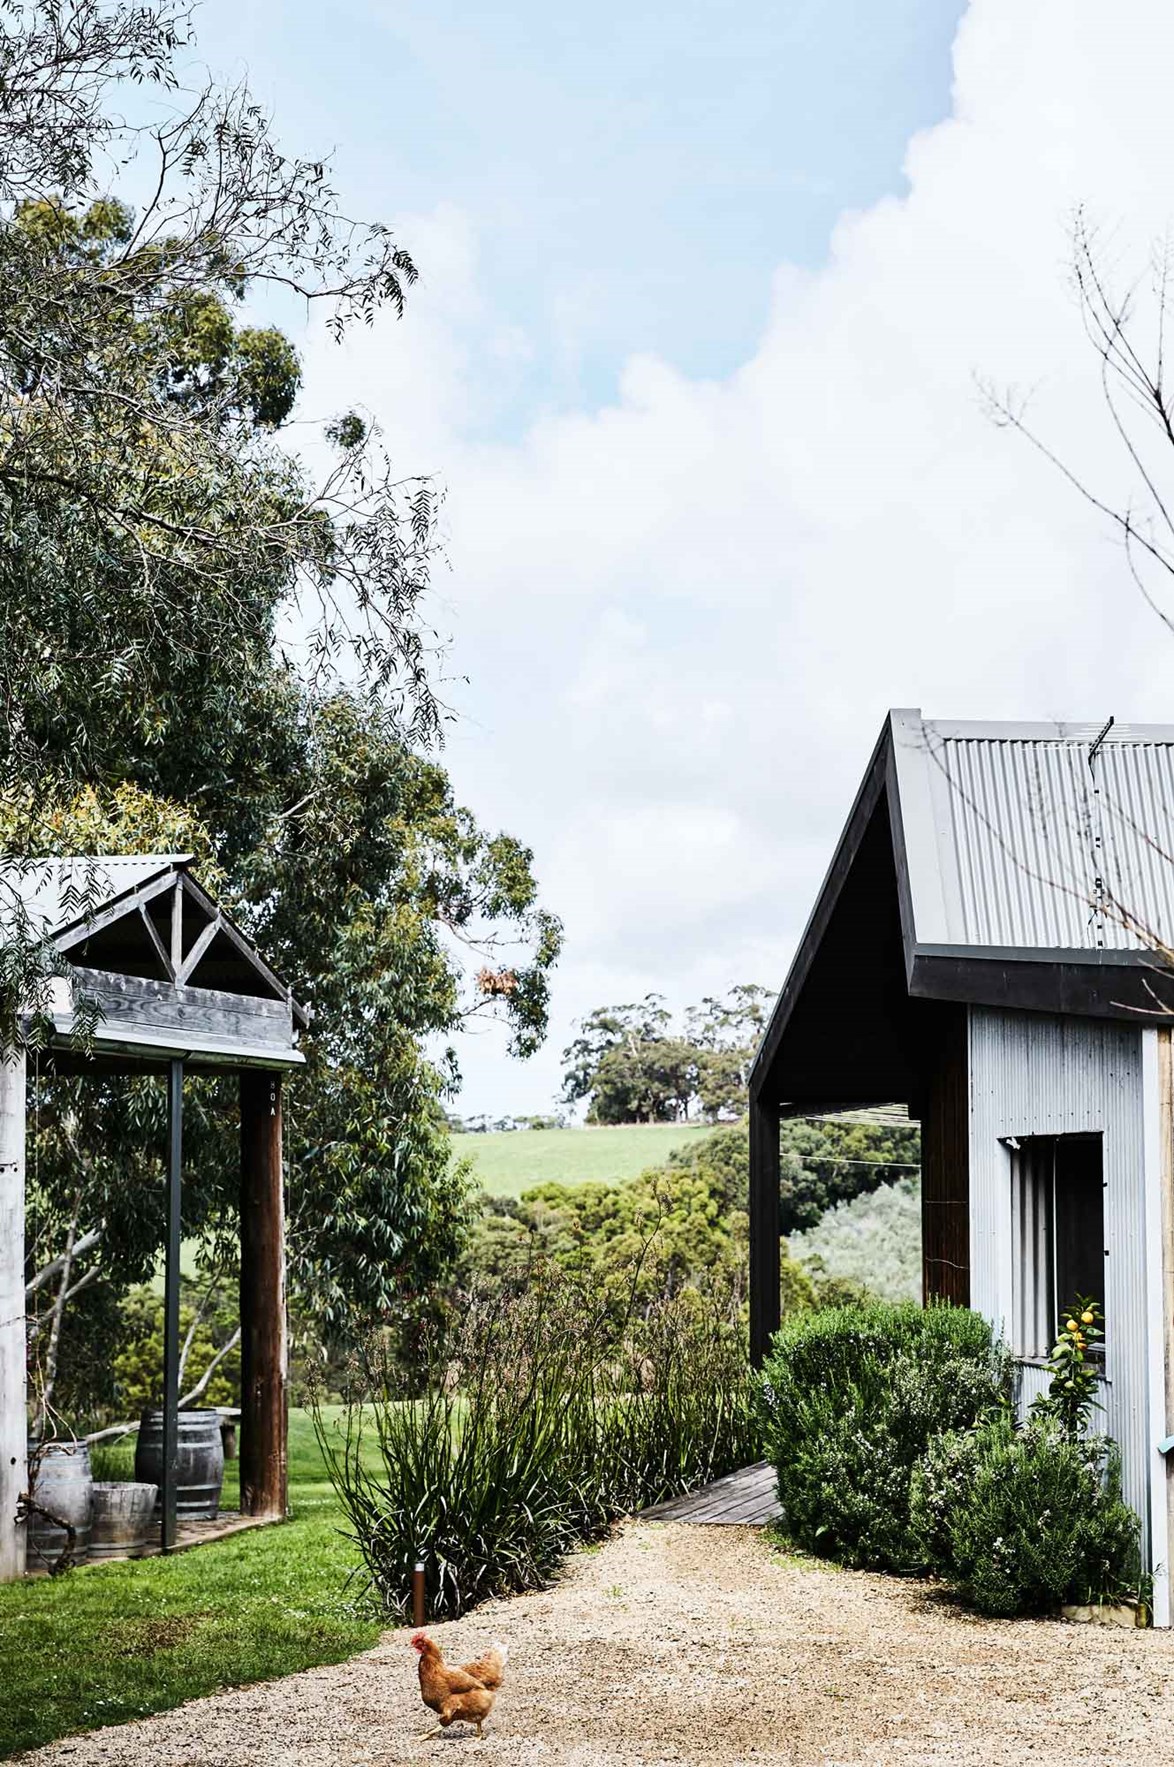 A lone chook explores the grounds of [Hart's Farm](https://www.homestolove.com.au/a-mornington-peninsula-cottage-and-olive-grove-13815|target="_blank"), an olive grove on the Mornington Peninsula. Out-buildings from the farm's former life as a dairy farm have since been extended and converted into guest accommodation.